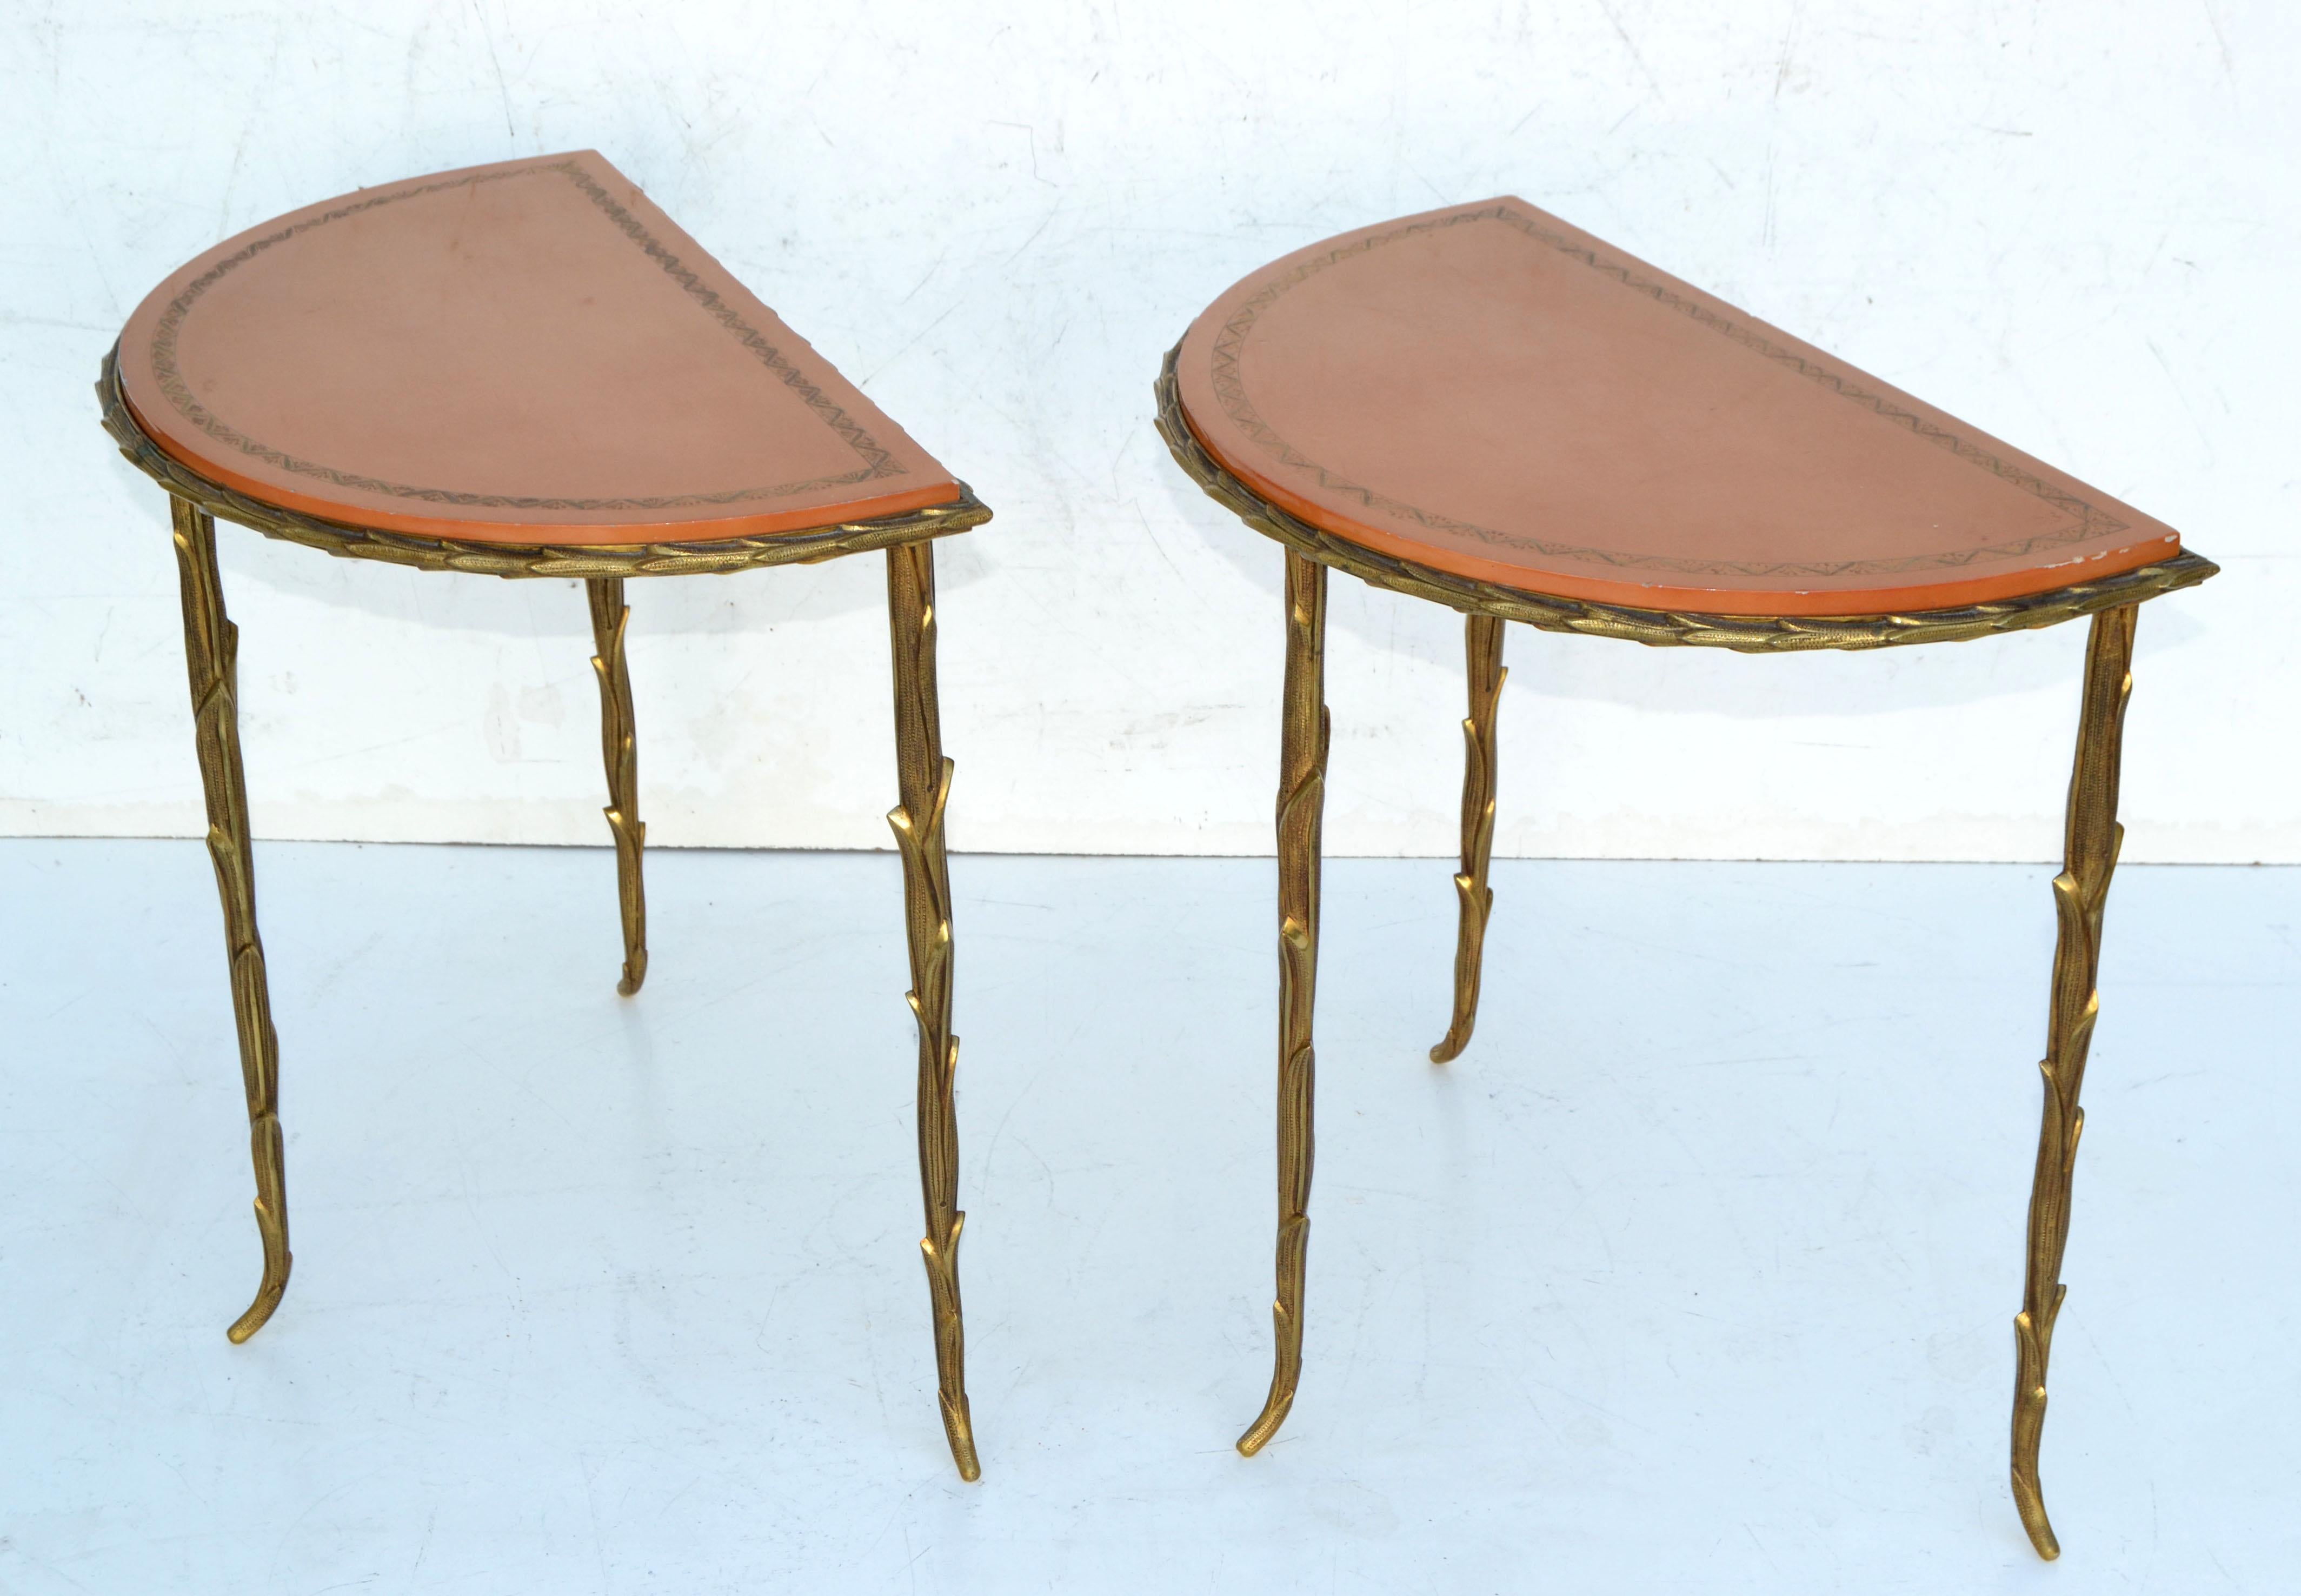 Hand-Crafted Bronze Maison Baguès Neoclassical Semi Circle Top Side Table, Pair